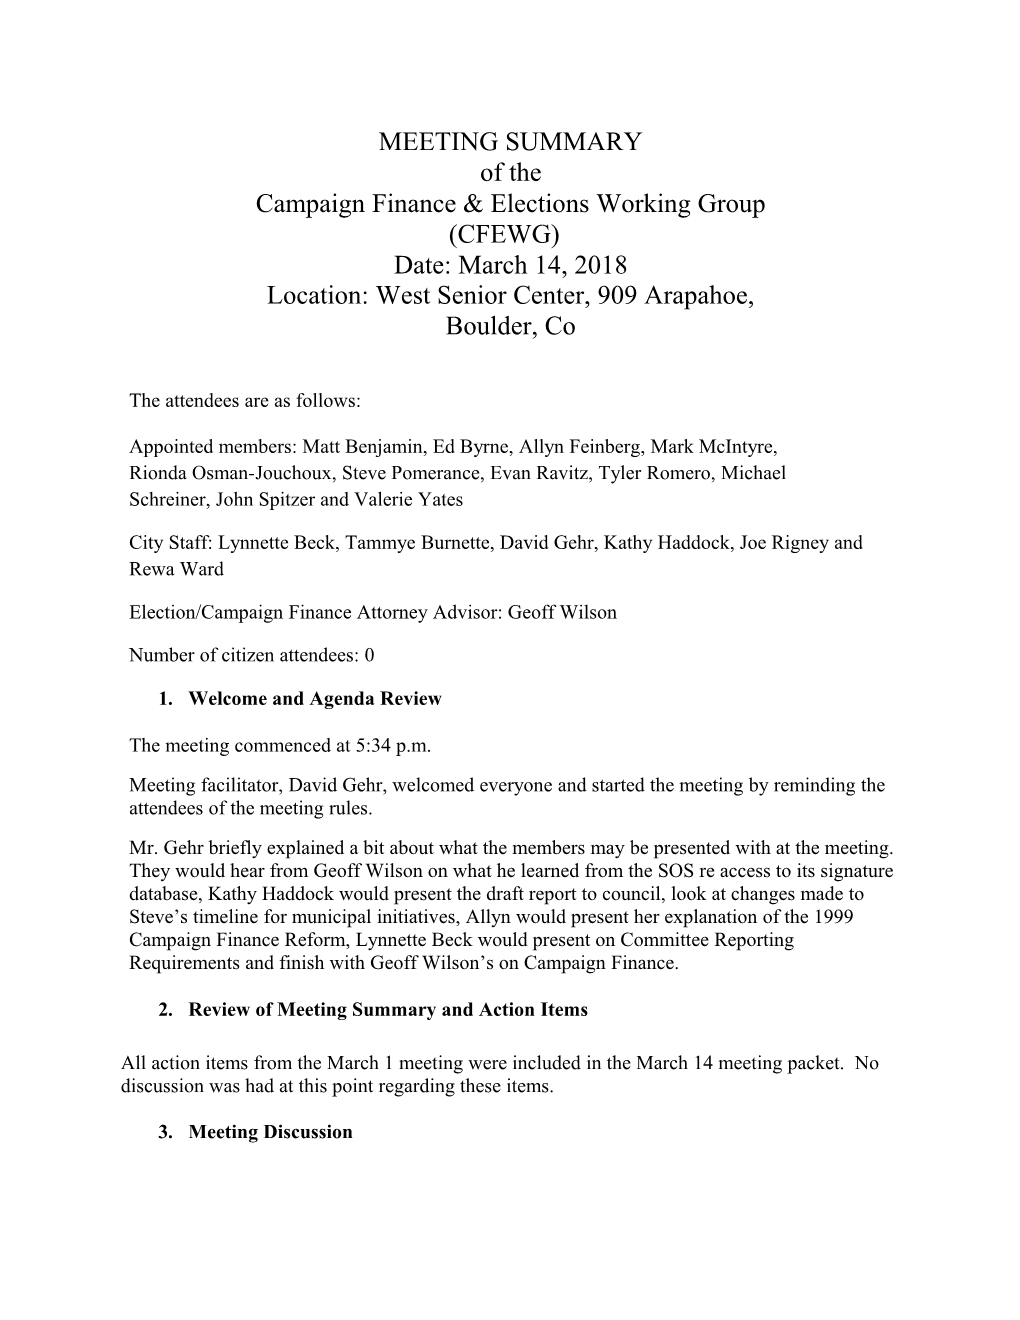 Campaign Finance & Elections Working Group (CFEWG)